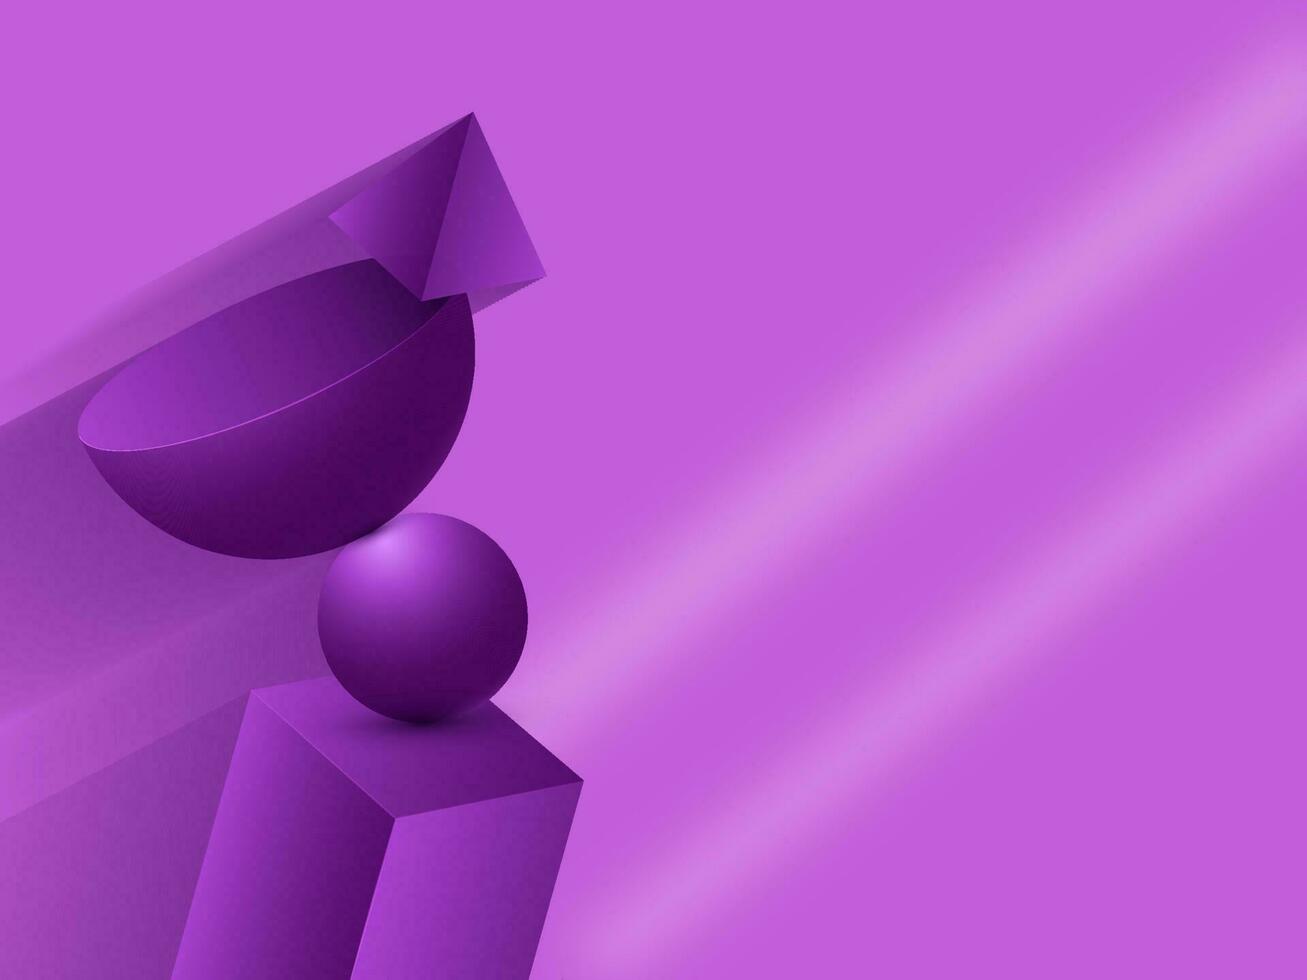 3D Geometric Element On Glossy Purple Background with Space for your text. vector